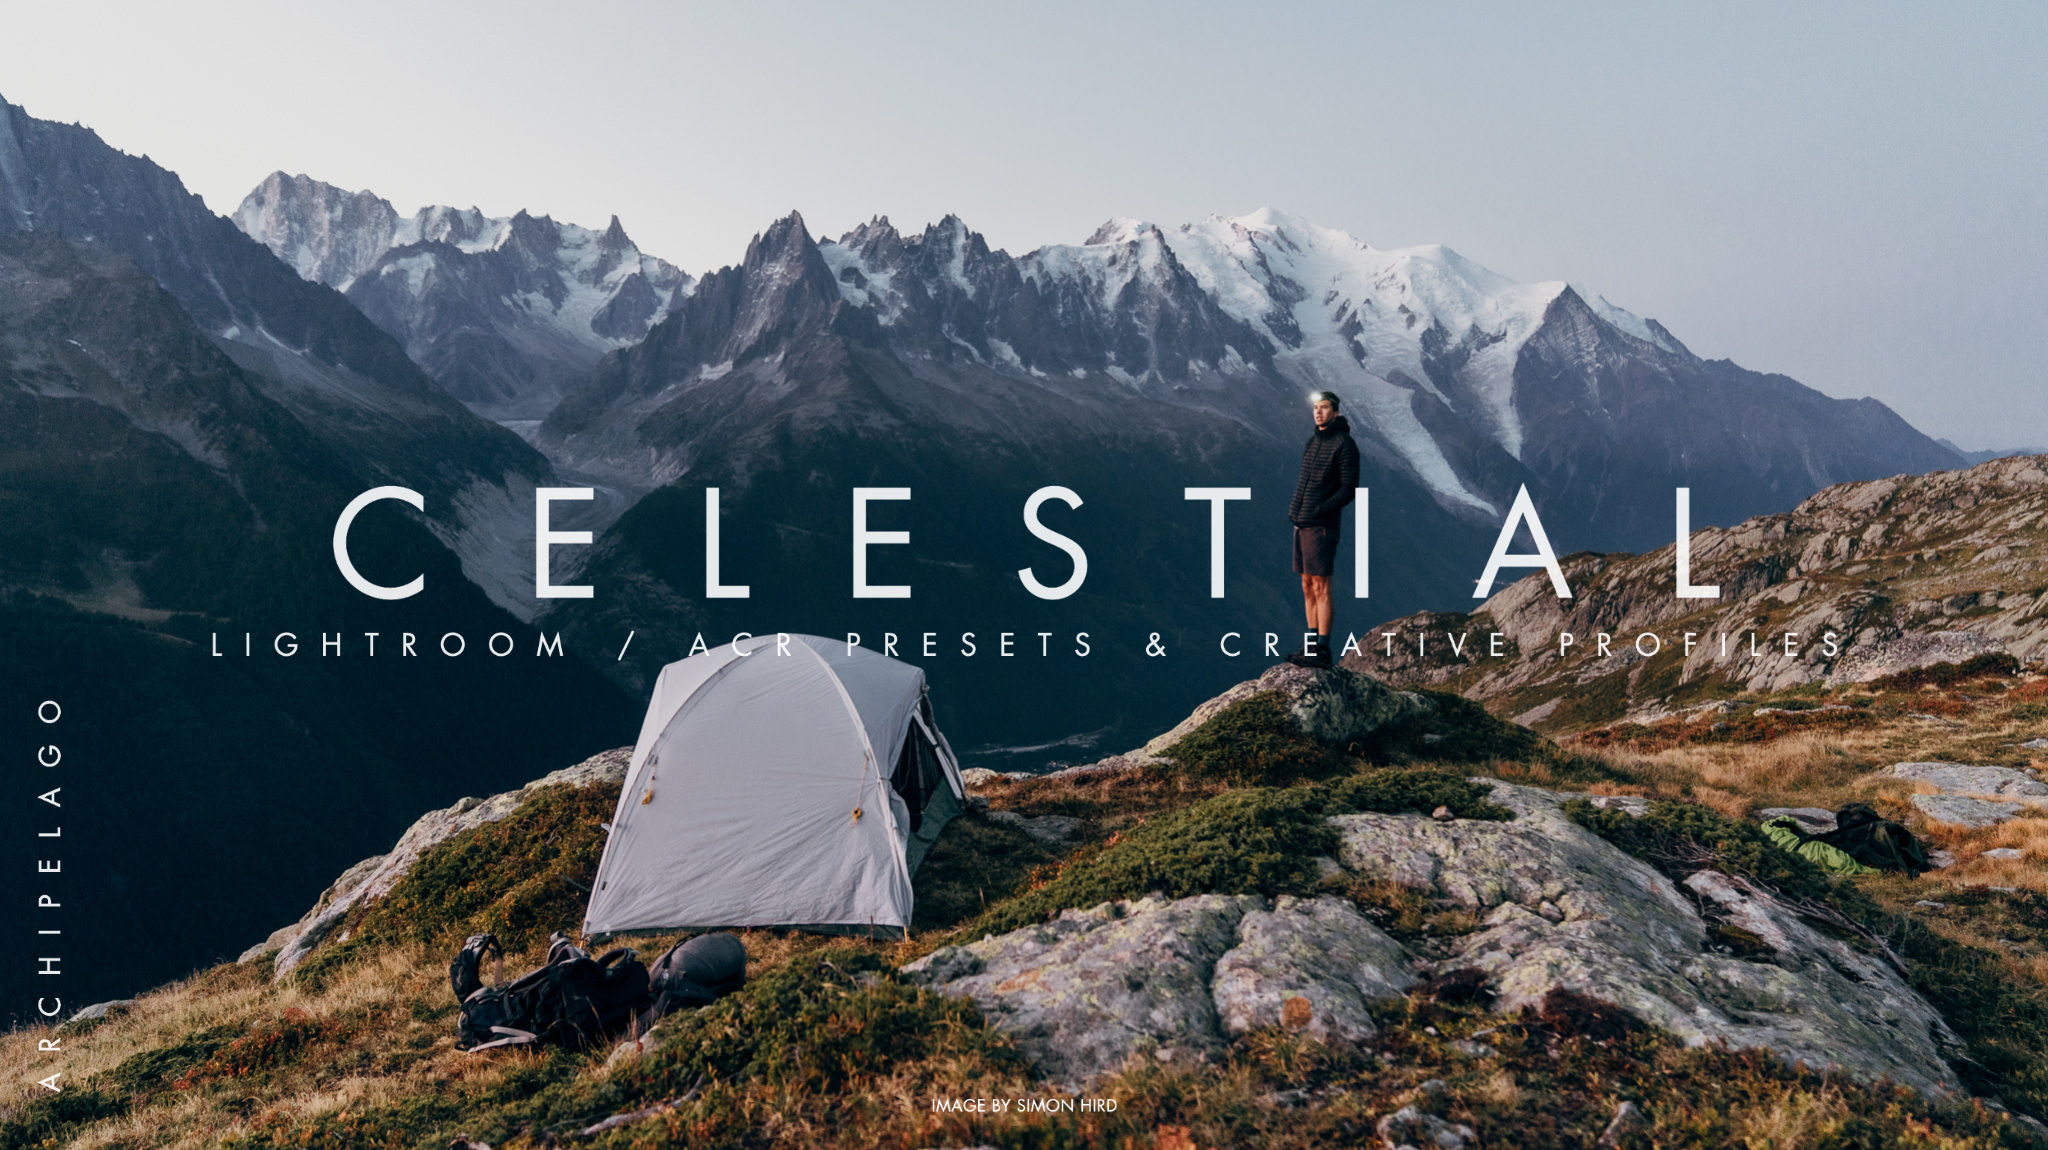 A man stands in the mountains next to his tent, an ad for celestial lightroom presets by archipelago presets.